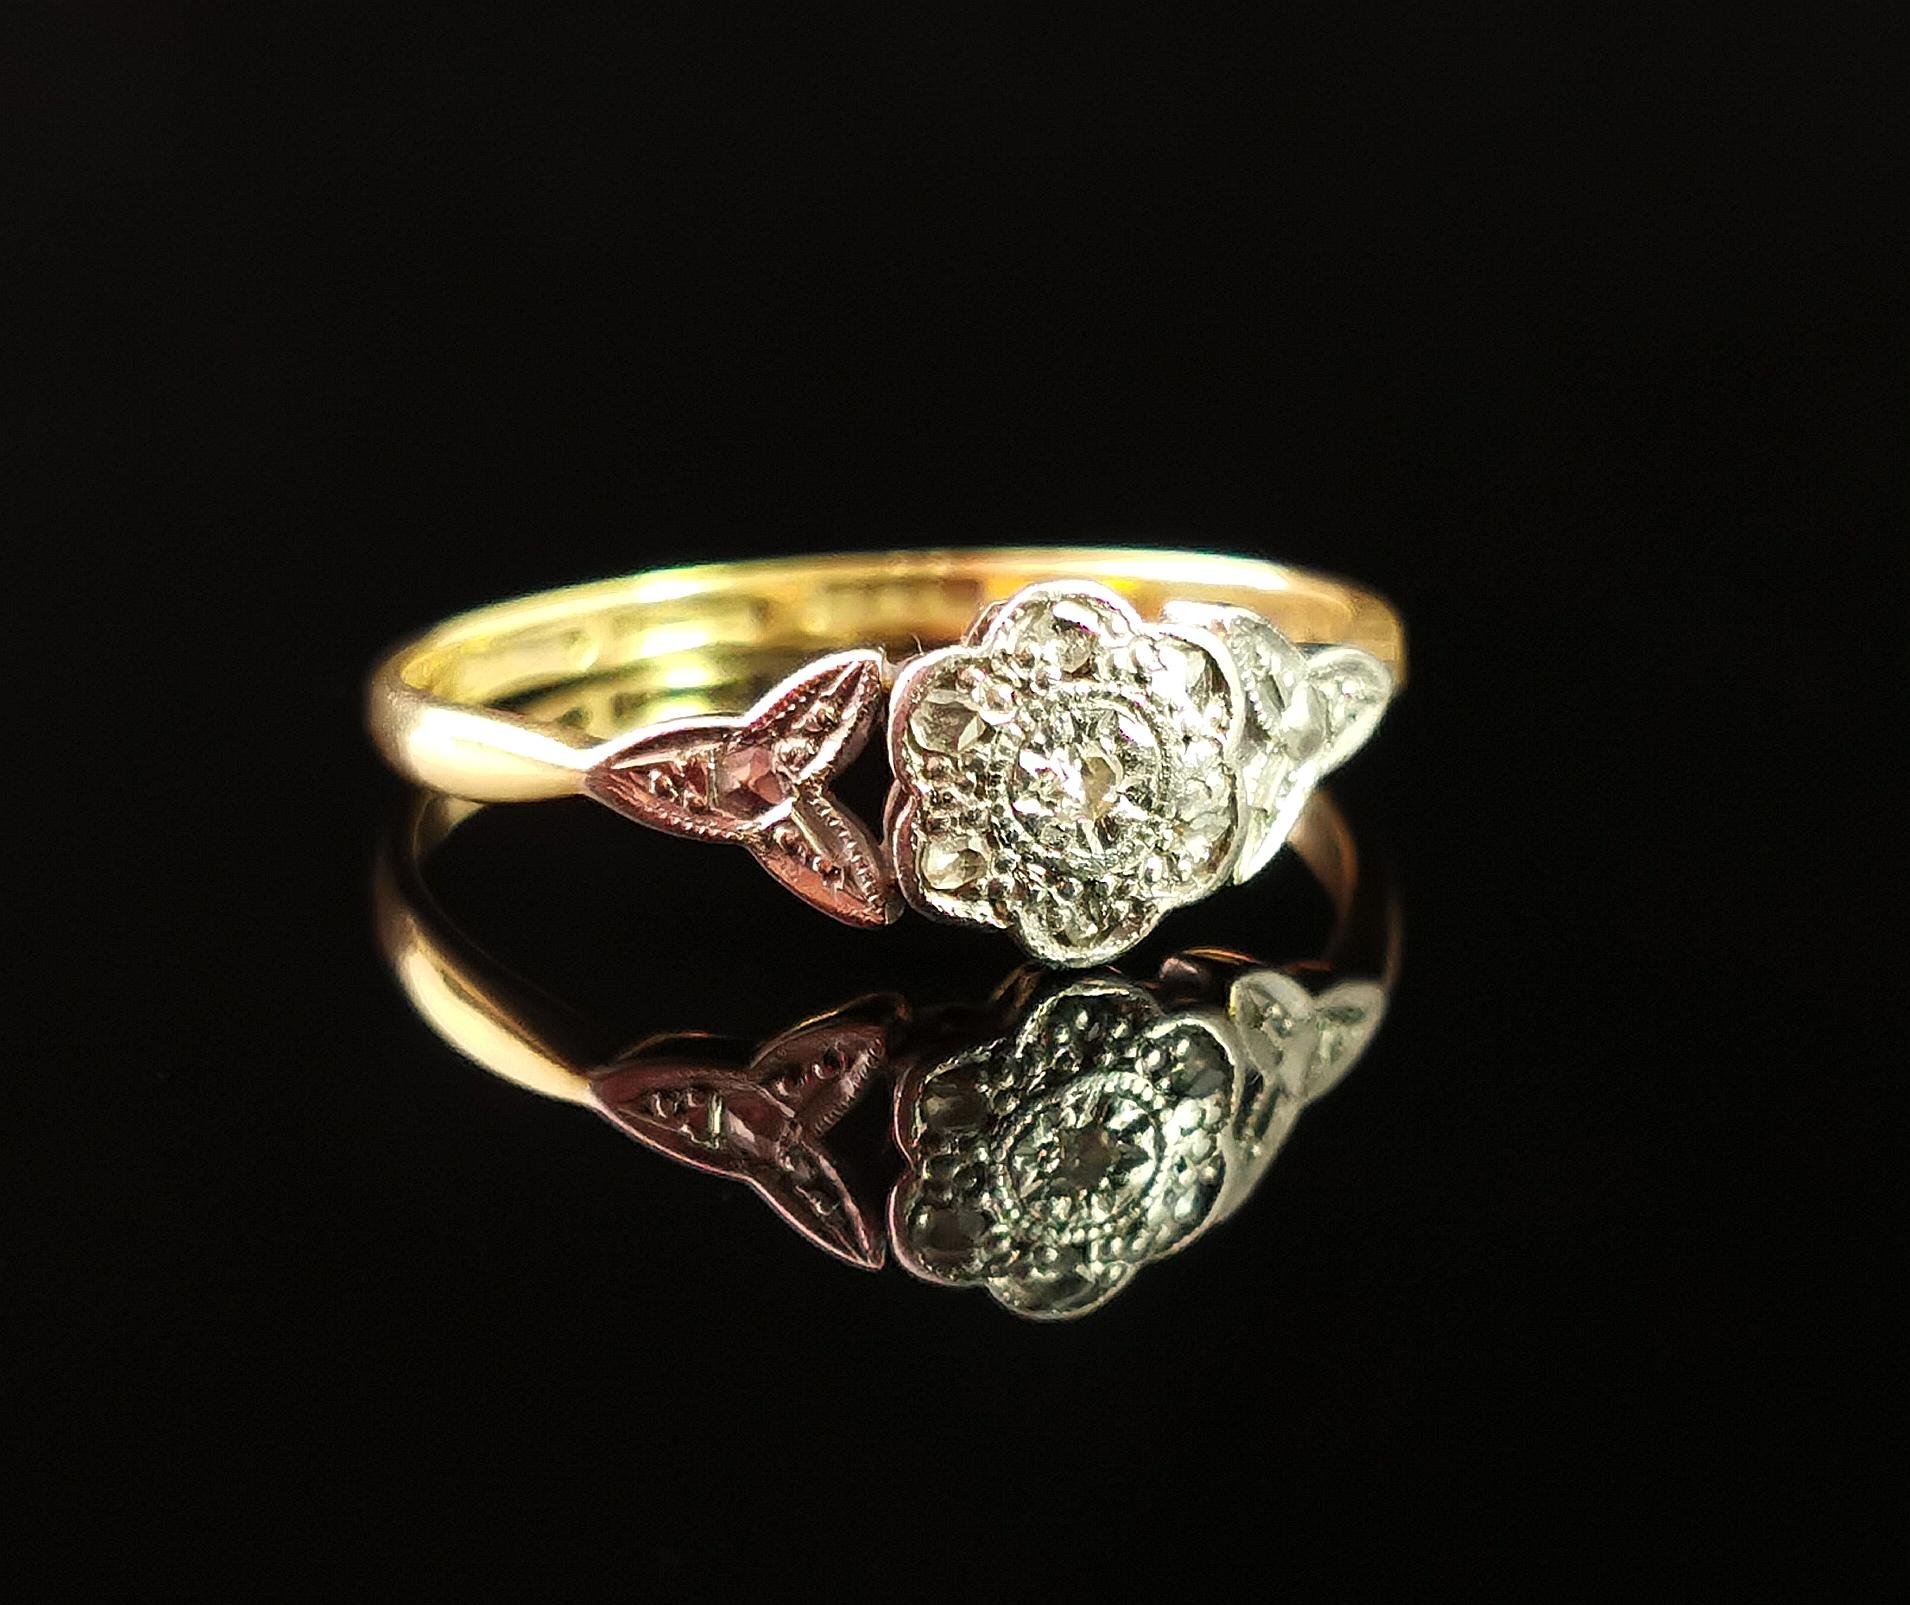 A stunning Antique, Art Nouveau diamond flower ring.

Crafted from rich 18 karat yellow gold and platinum.

It has a slender rich gold band leading up to the front platinum setting, it is designed as a flower in an illusion style, set with seven